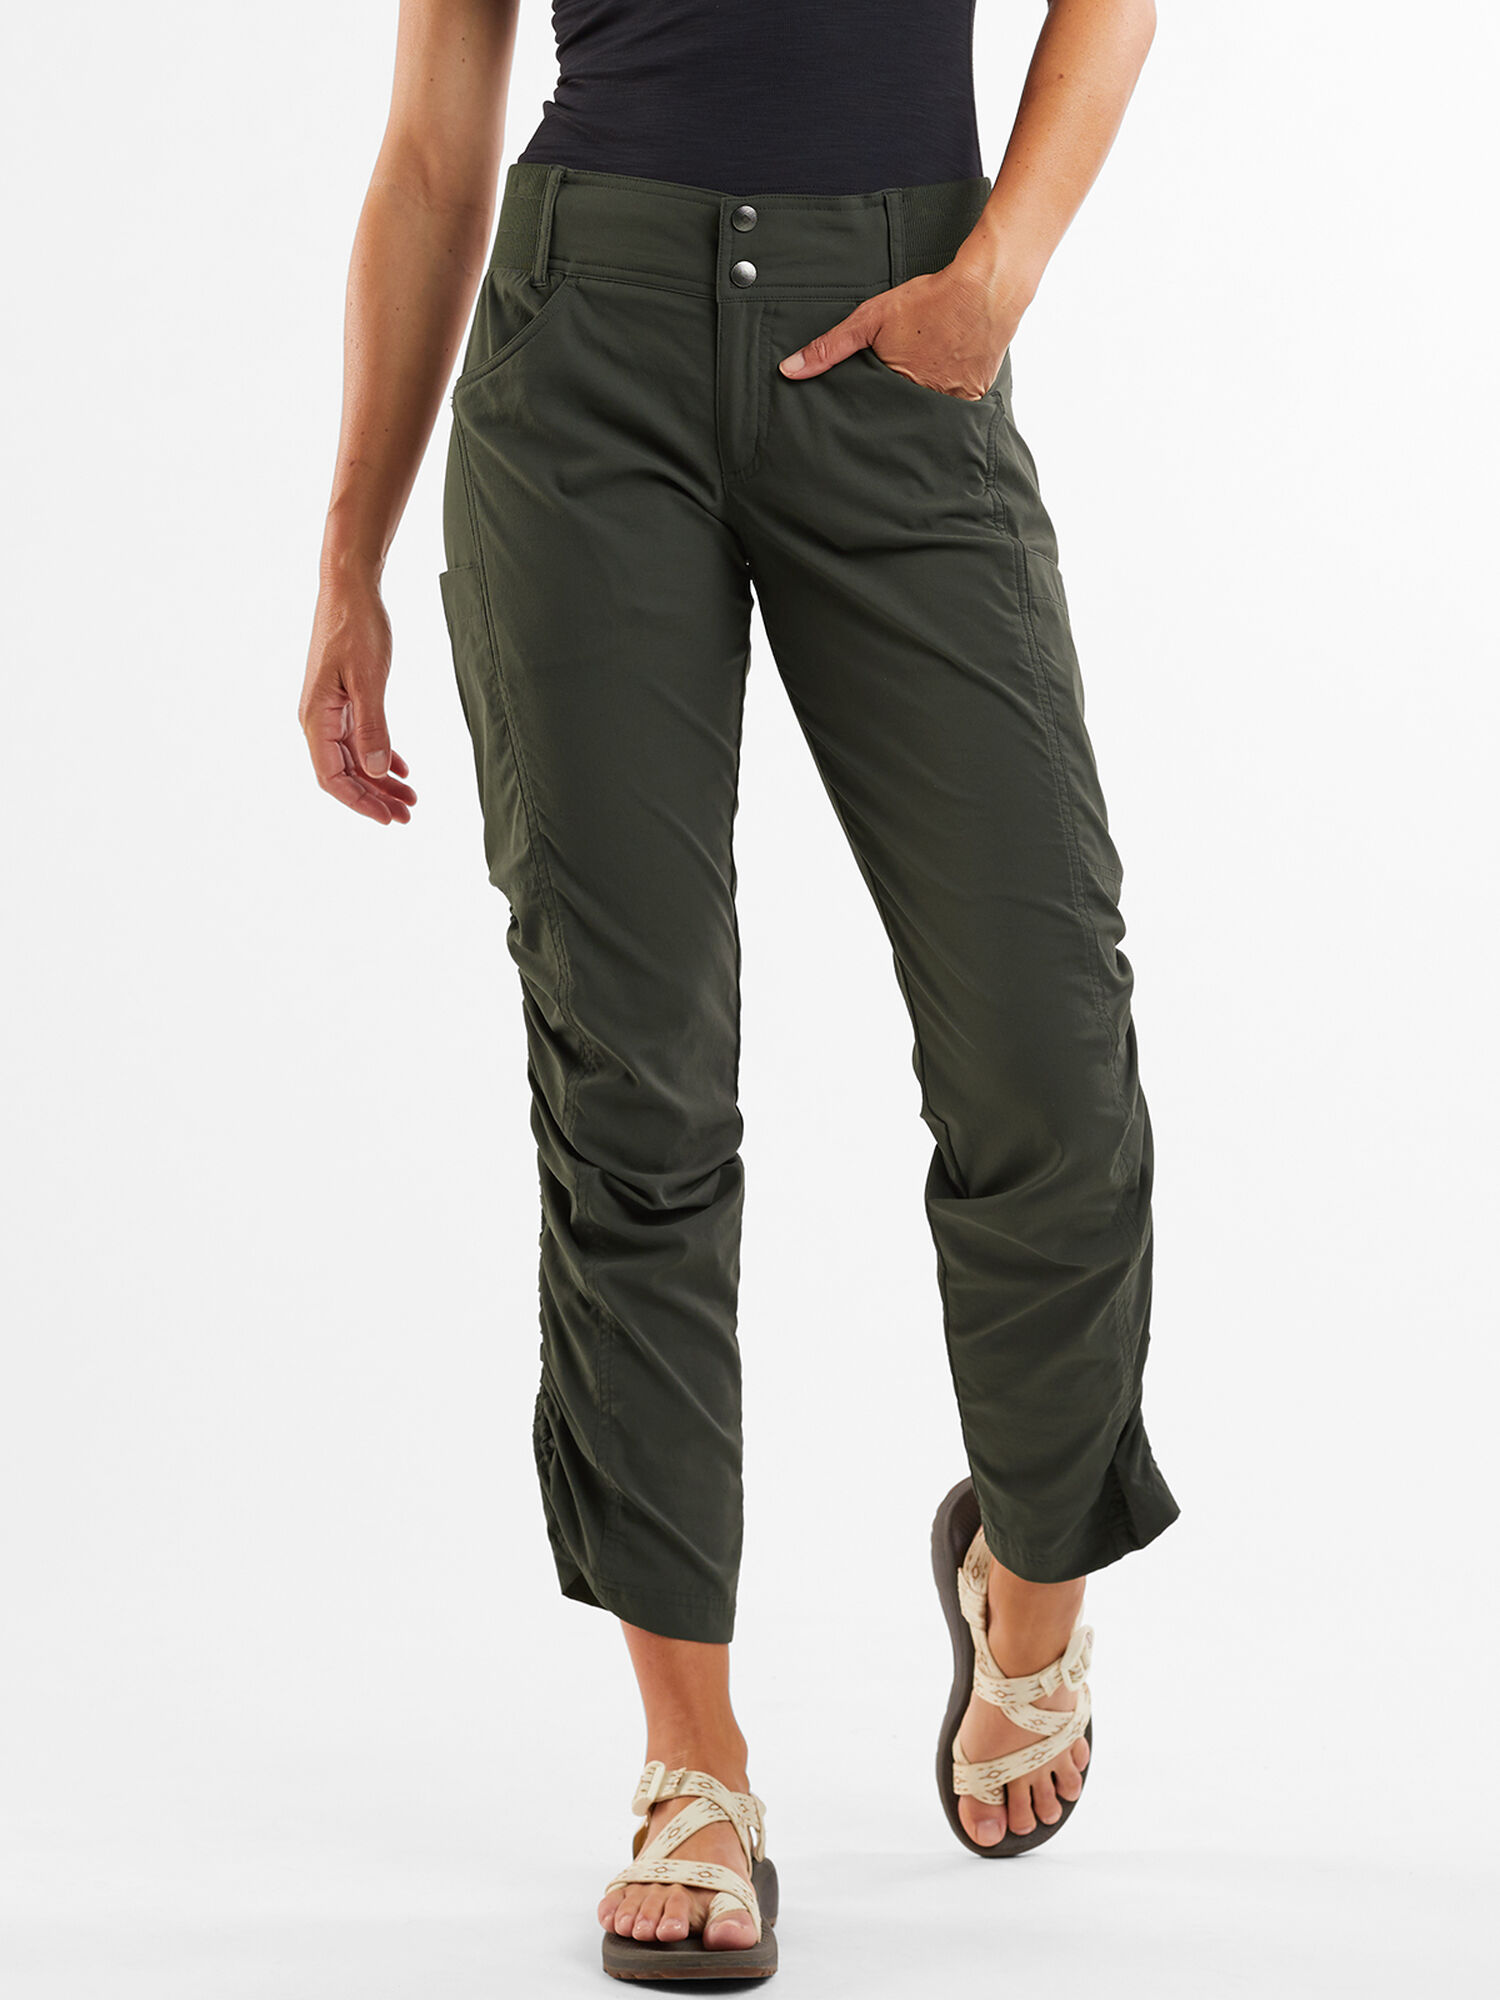 Hiking Pants Women: Recycled Clamber 30